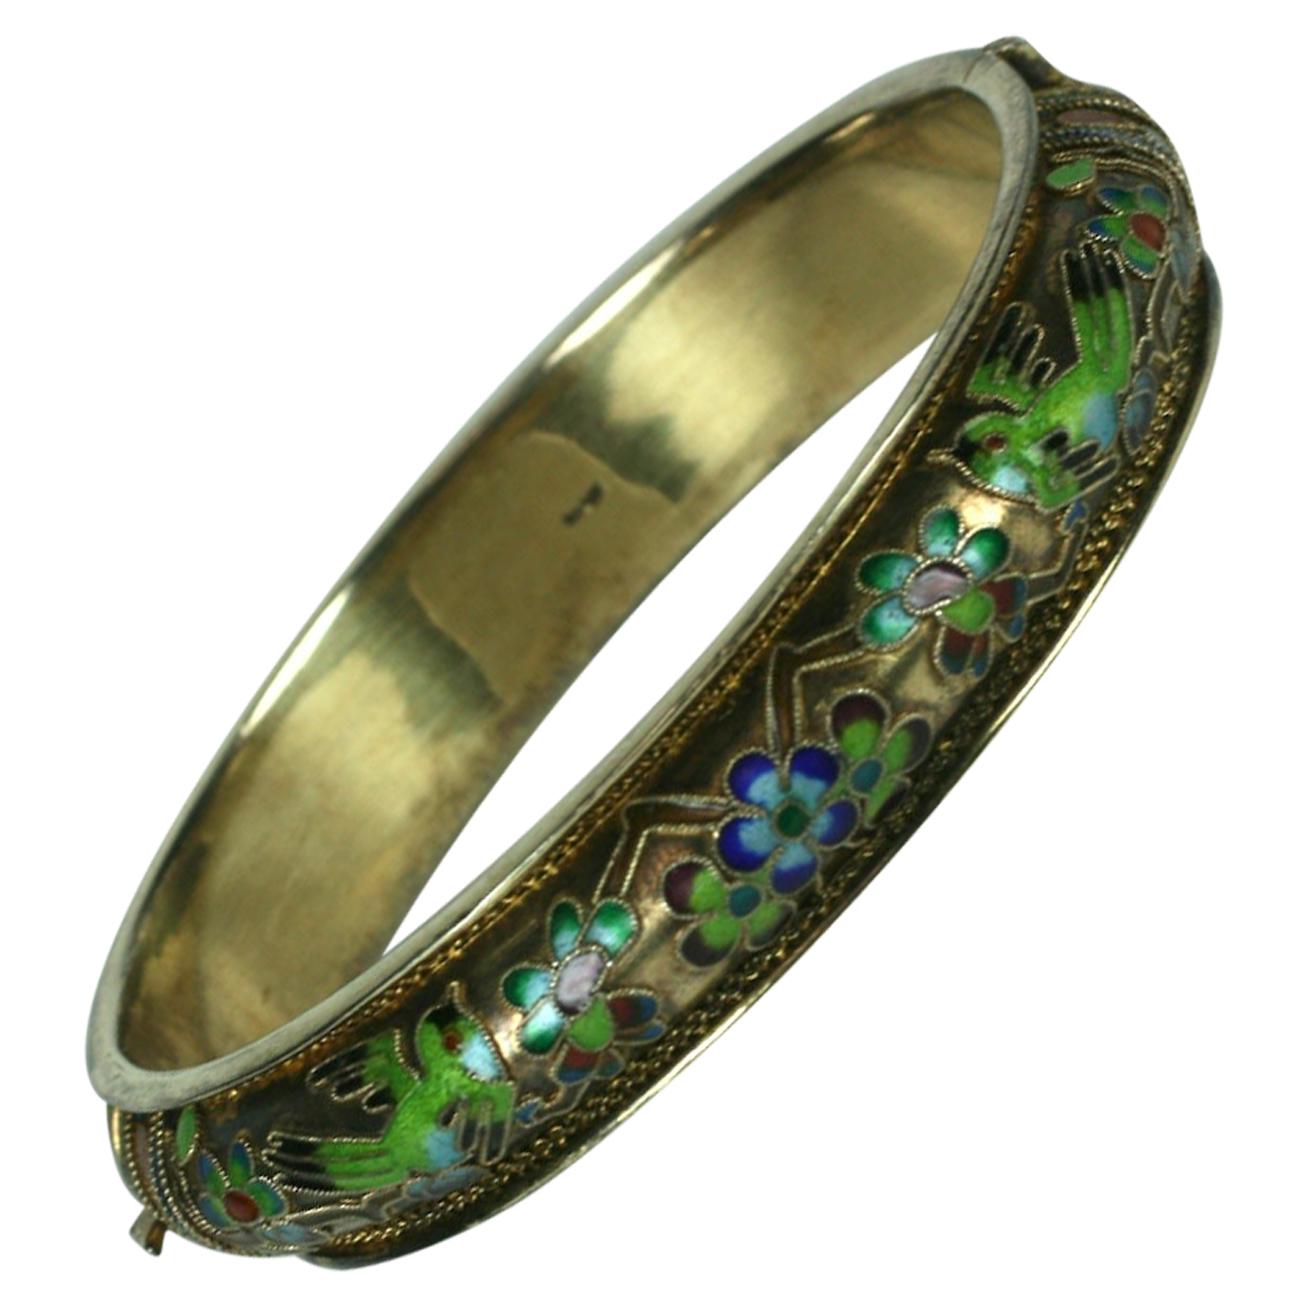 What is cloisonné jewelry?